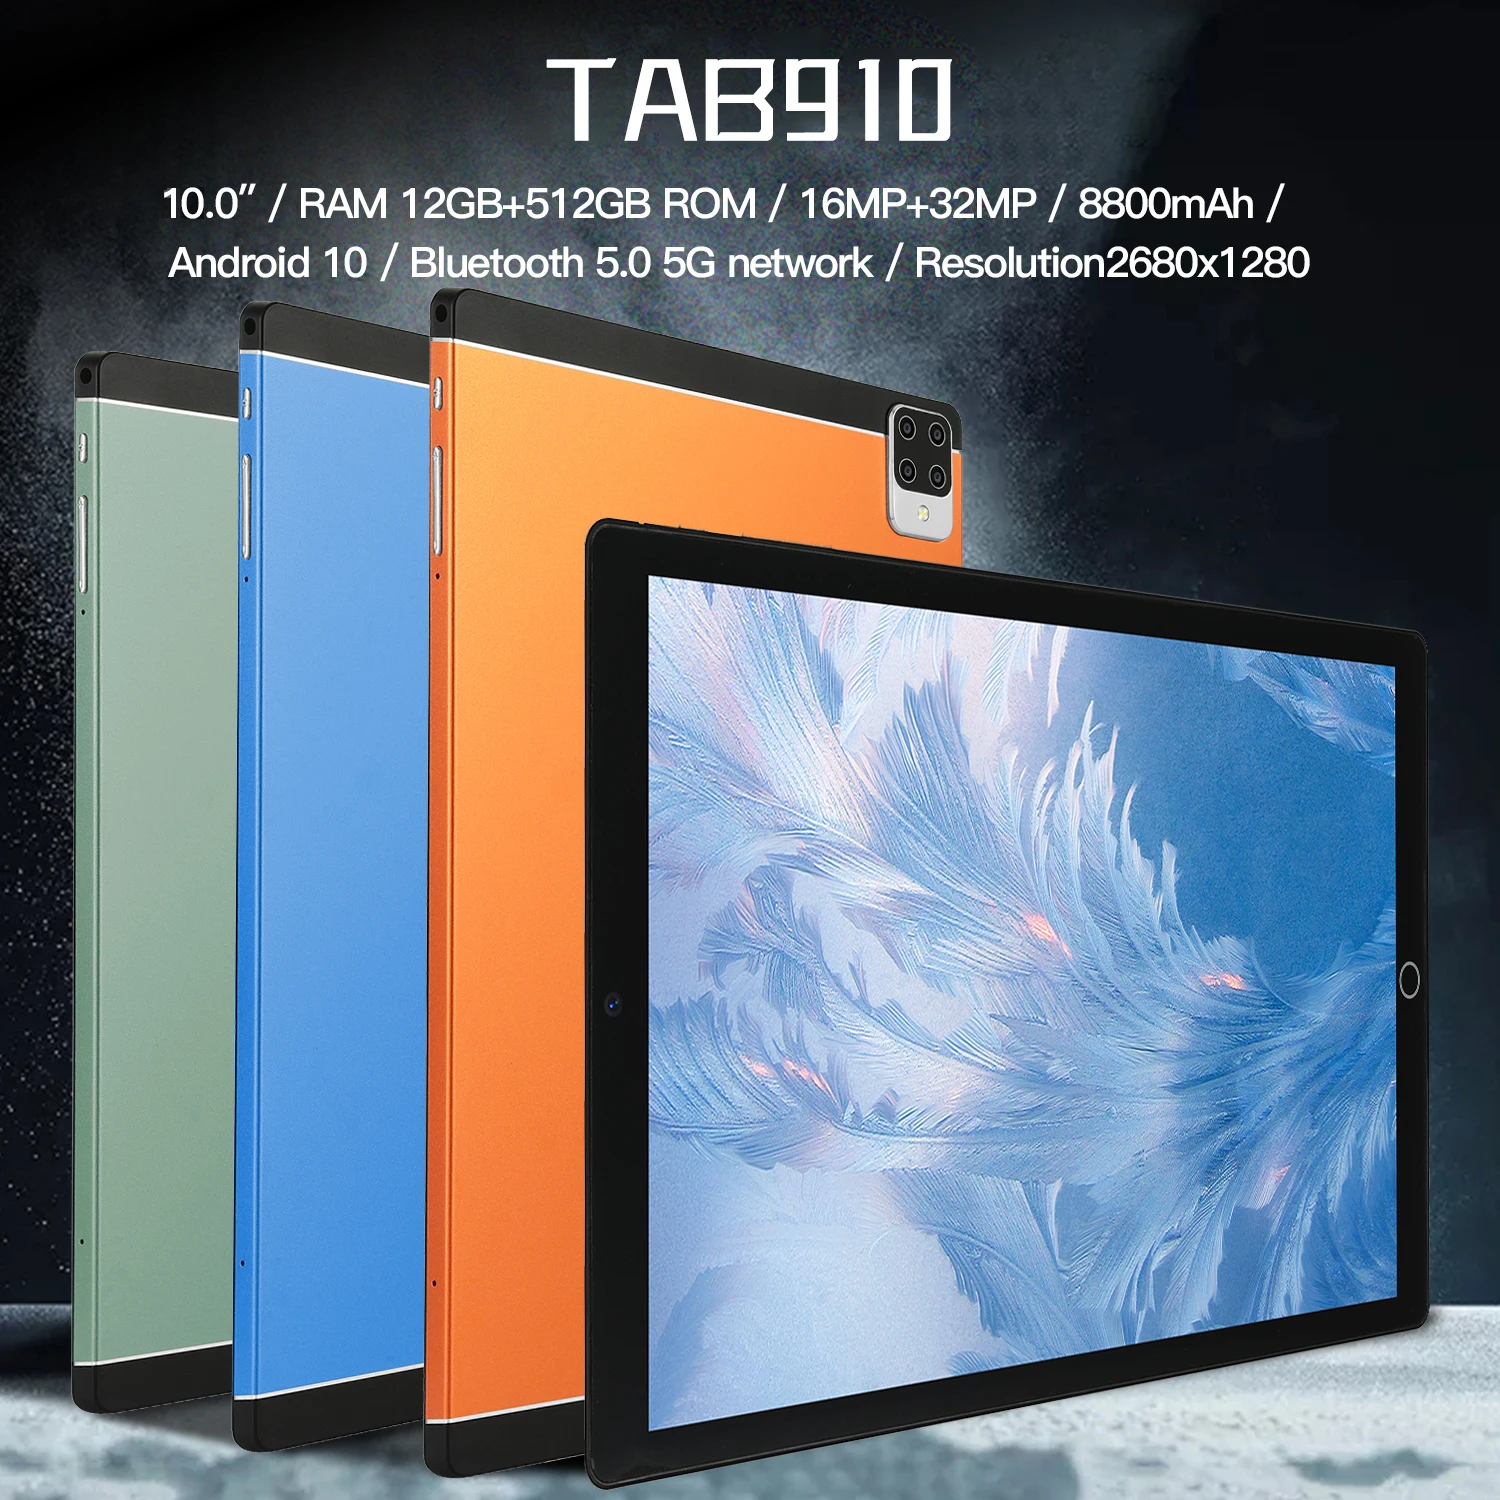 most popular tablet brands Cheap Notebook Google Play WIFI Android Tablet WPS Office 10 Inch Tablet 16MP+32MP Camera Laptop GPS Android10.0 TAB910 Pad Pro cheap note taking tablet